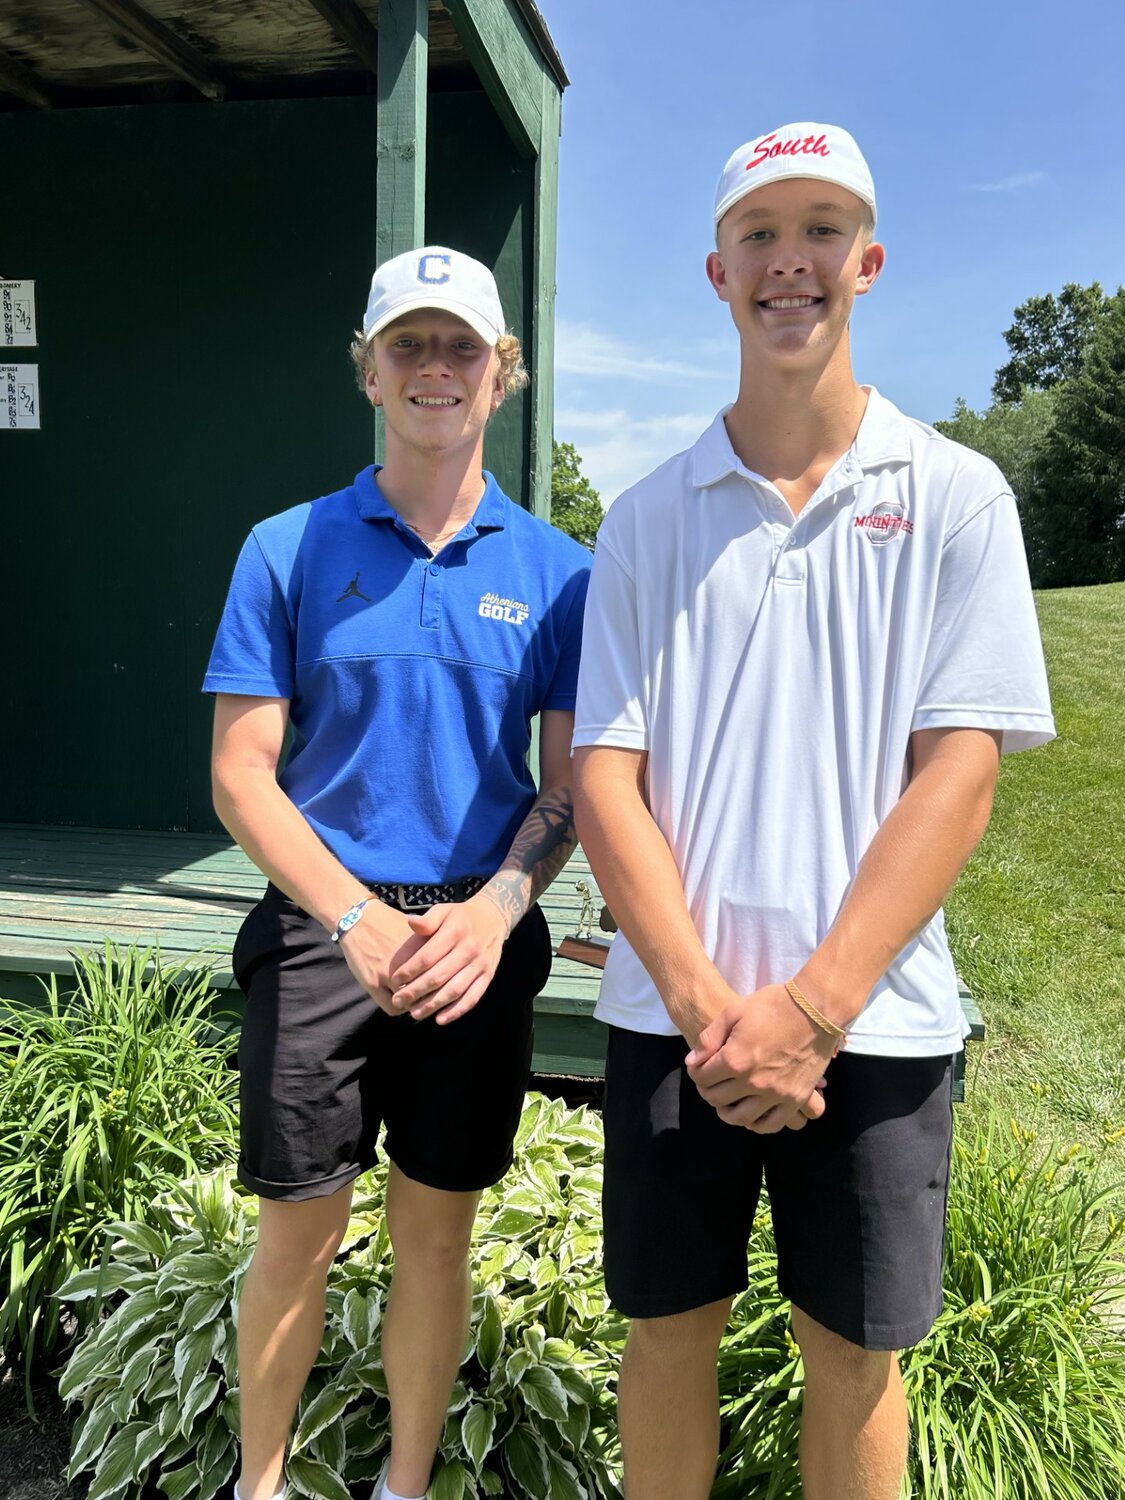 Southmont’s Austin Foley and Crawfordsville’s Tanner Gilland also advanced as individuals to next Friday’s Regional at Coyote Crossing in West Lafayette.